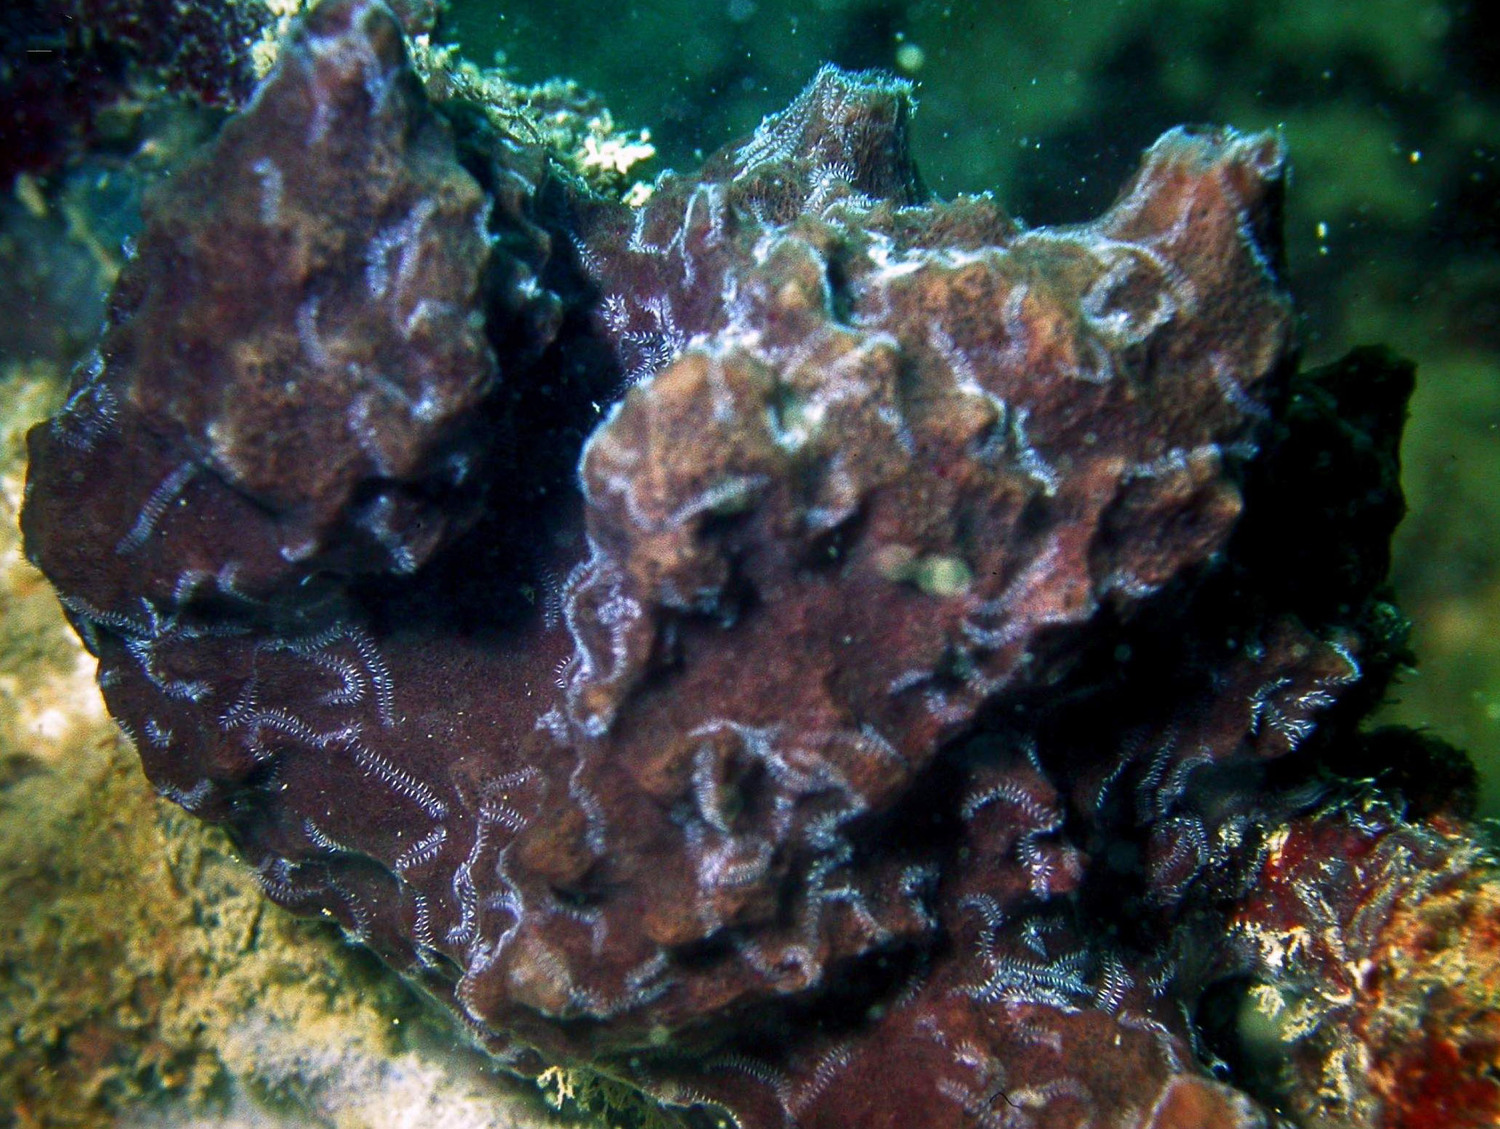 The host sponge (Petrosia) where several posterior ends of one specimen of the worm Ramisyllis multicaudata can be seen as white lines crawling on the sponge’s surface.